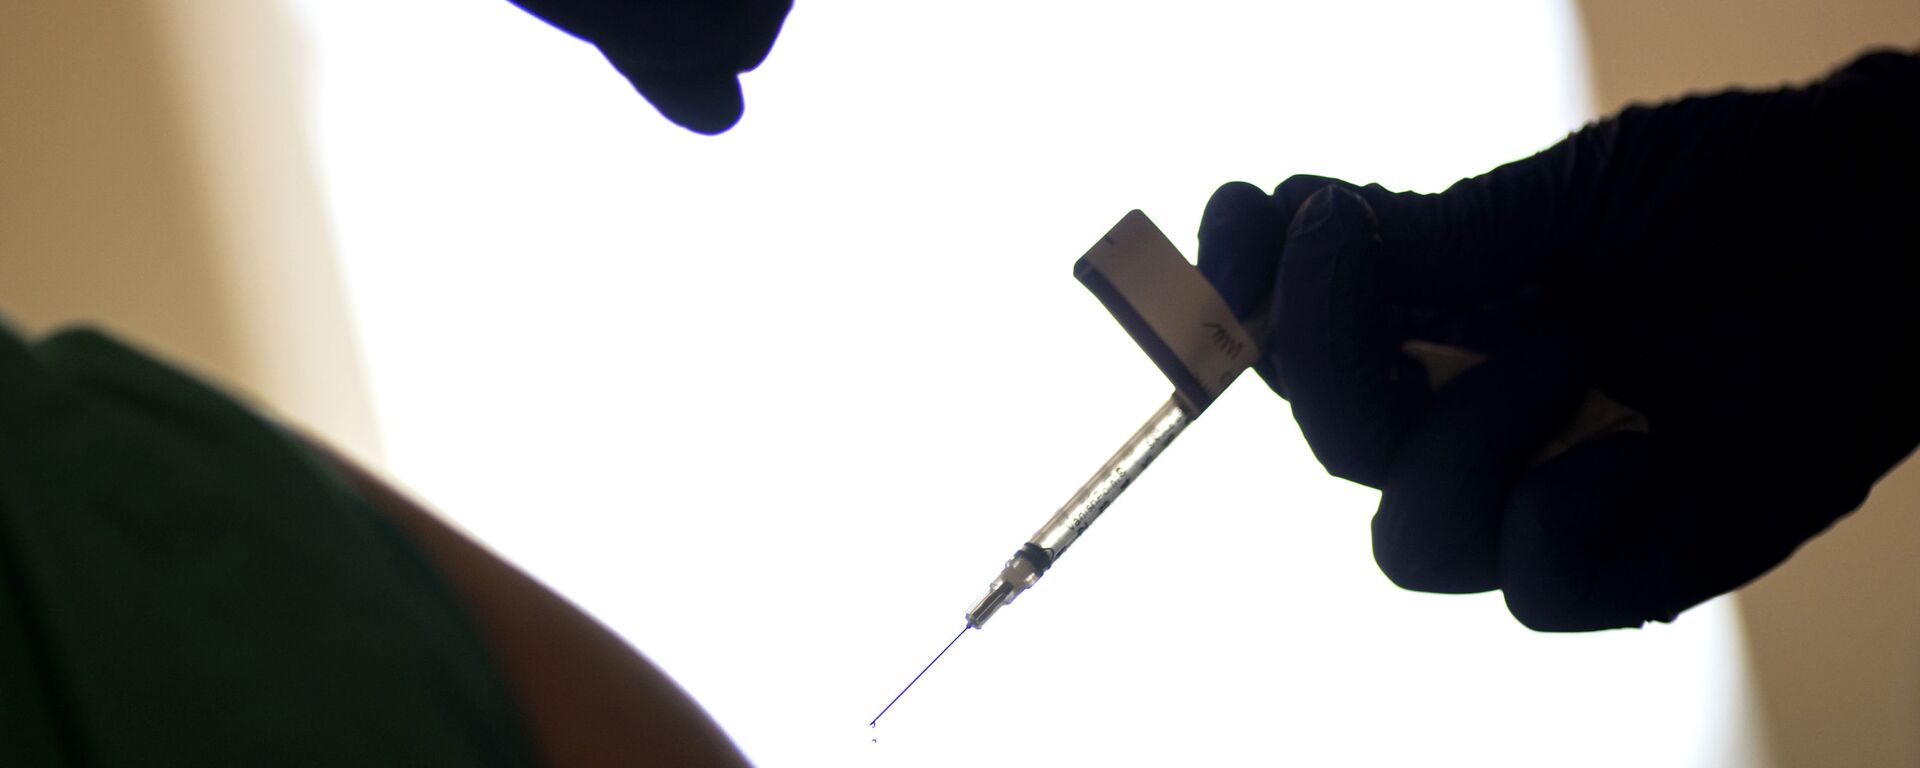 In this Tuesday, Dec. 15, 2020 file photo, a droplet falls from a syringe after a health care worker was injected with the Pfizer-BioNTech COVID-19 vaccine at a hospital in Providence, R.I. - Sputnik International, 1920, 18.07.2021